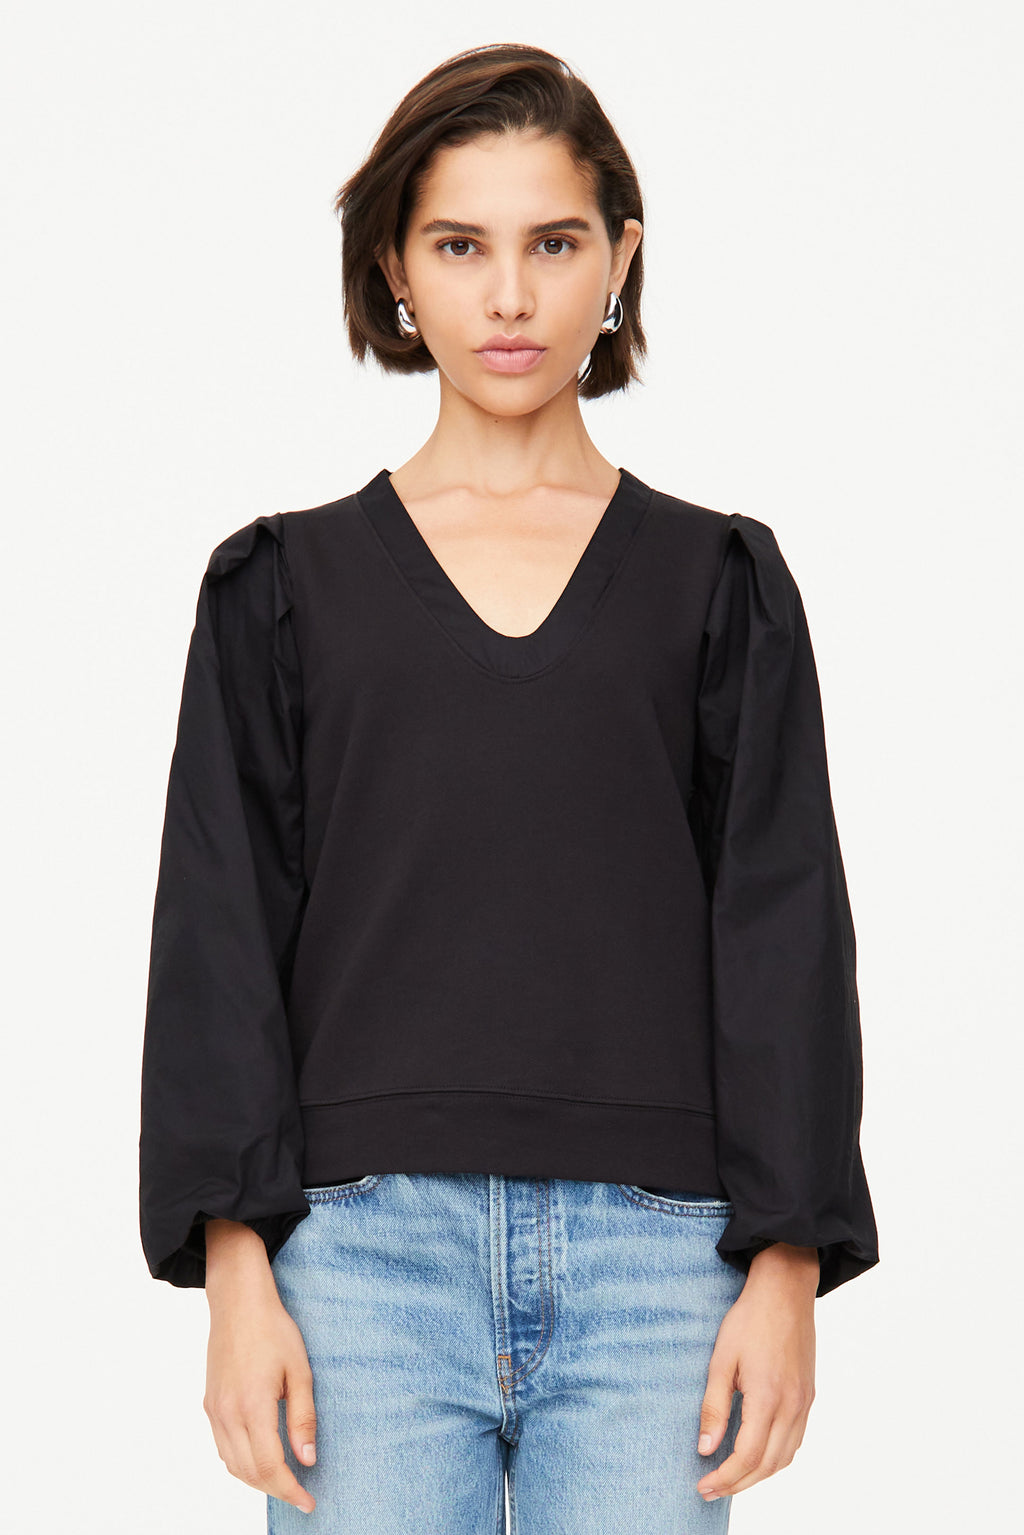 Black long sleeve top with  v-neckline and cuffed tie sleeves